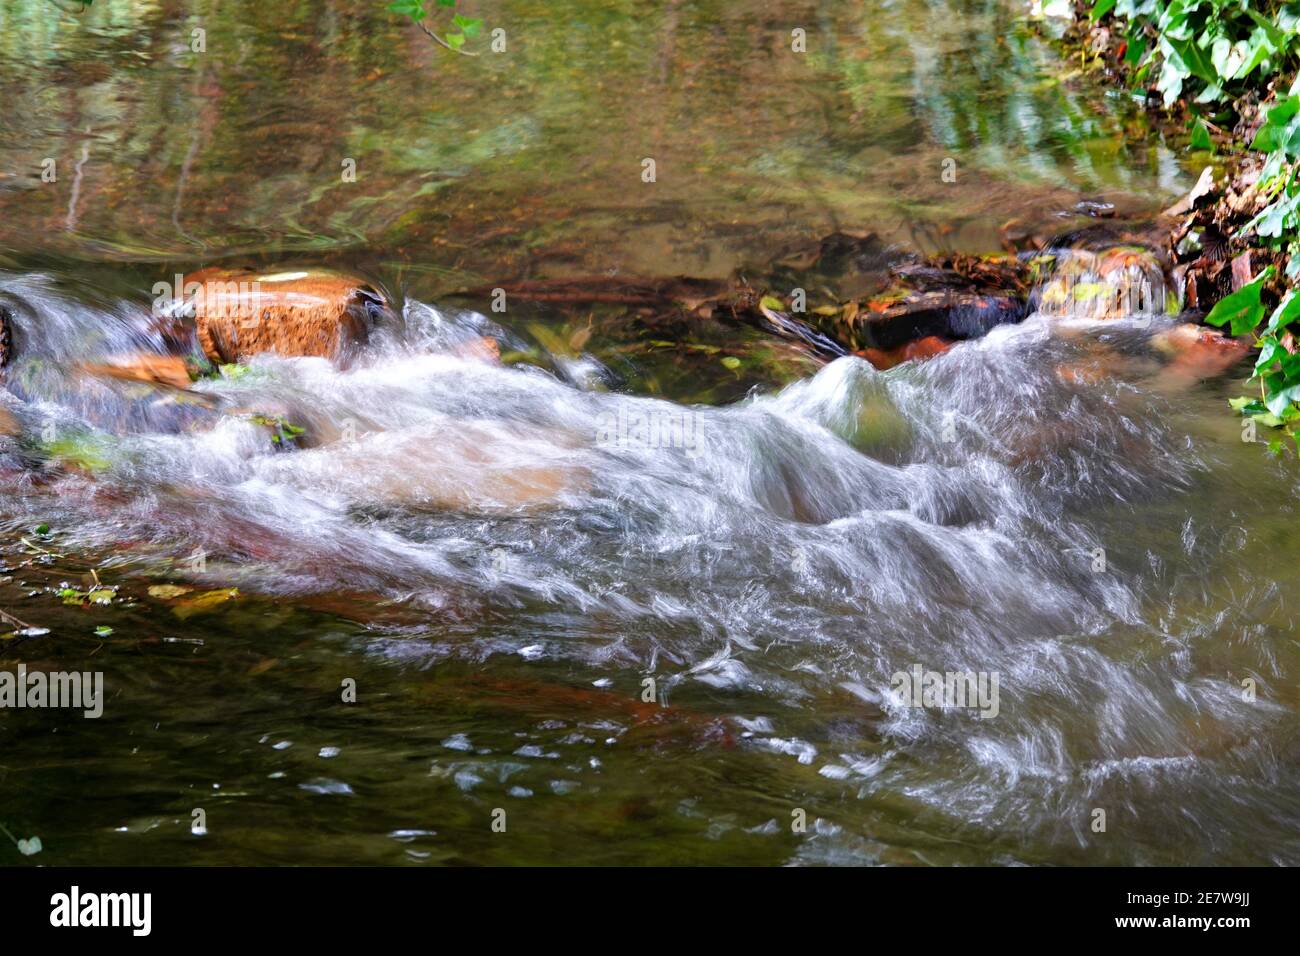 A small brook with a slo-mo slow motion to capture the beautiful water flow Stock Photo